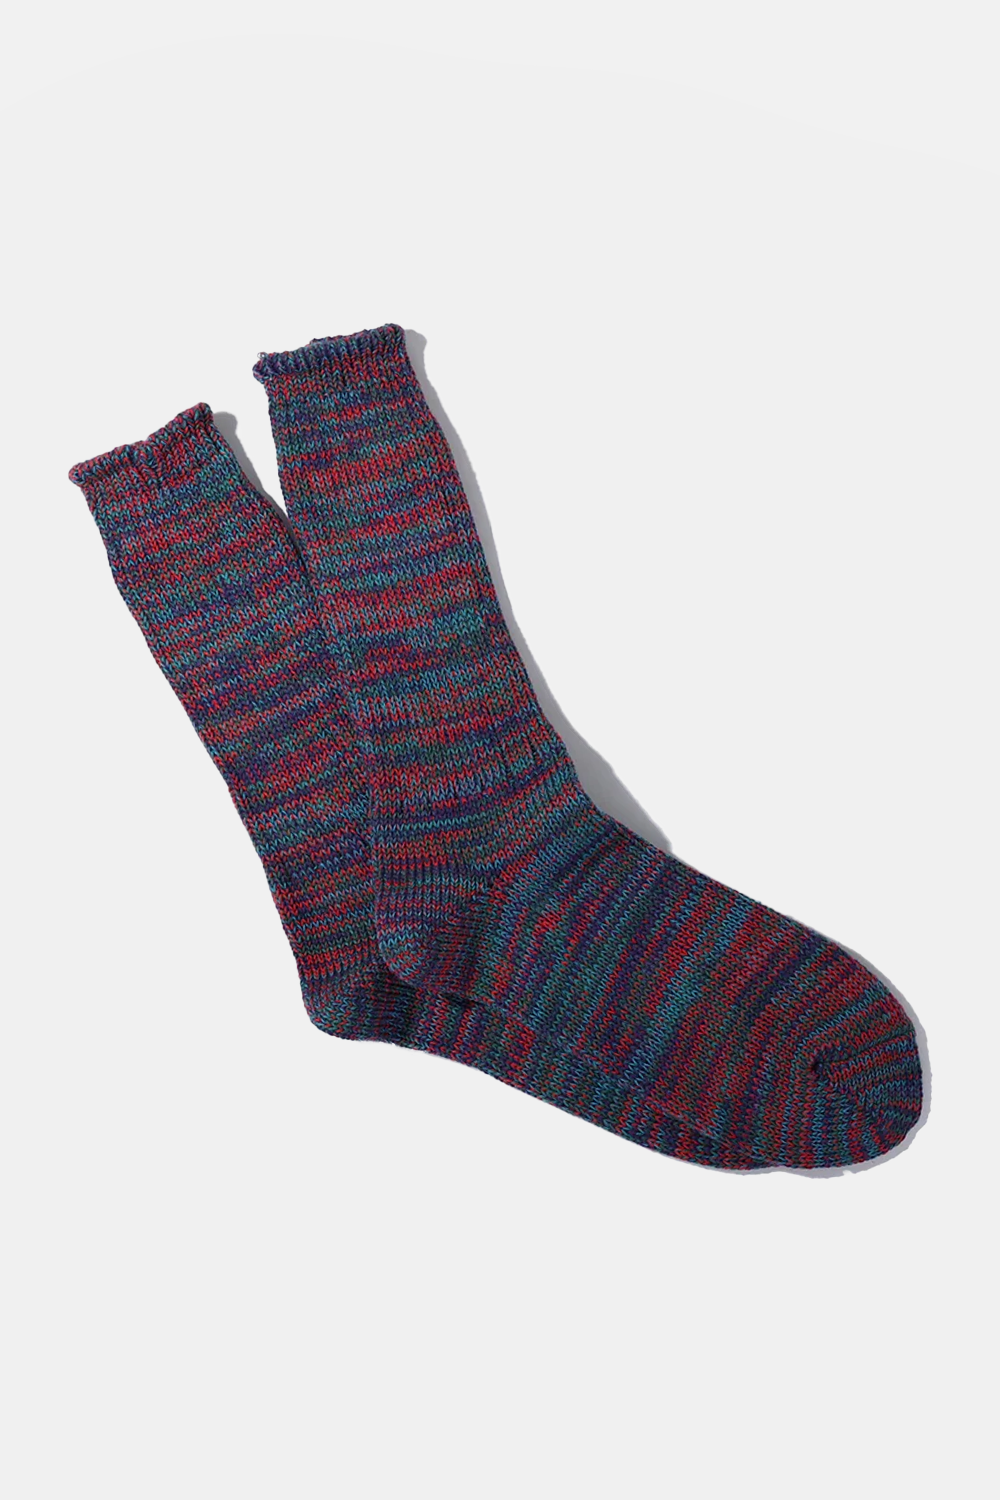 Anonymous Ism 5 Colour Mix Ribbed Crew Socks (Navy)
